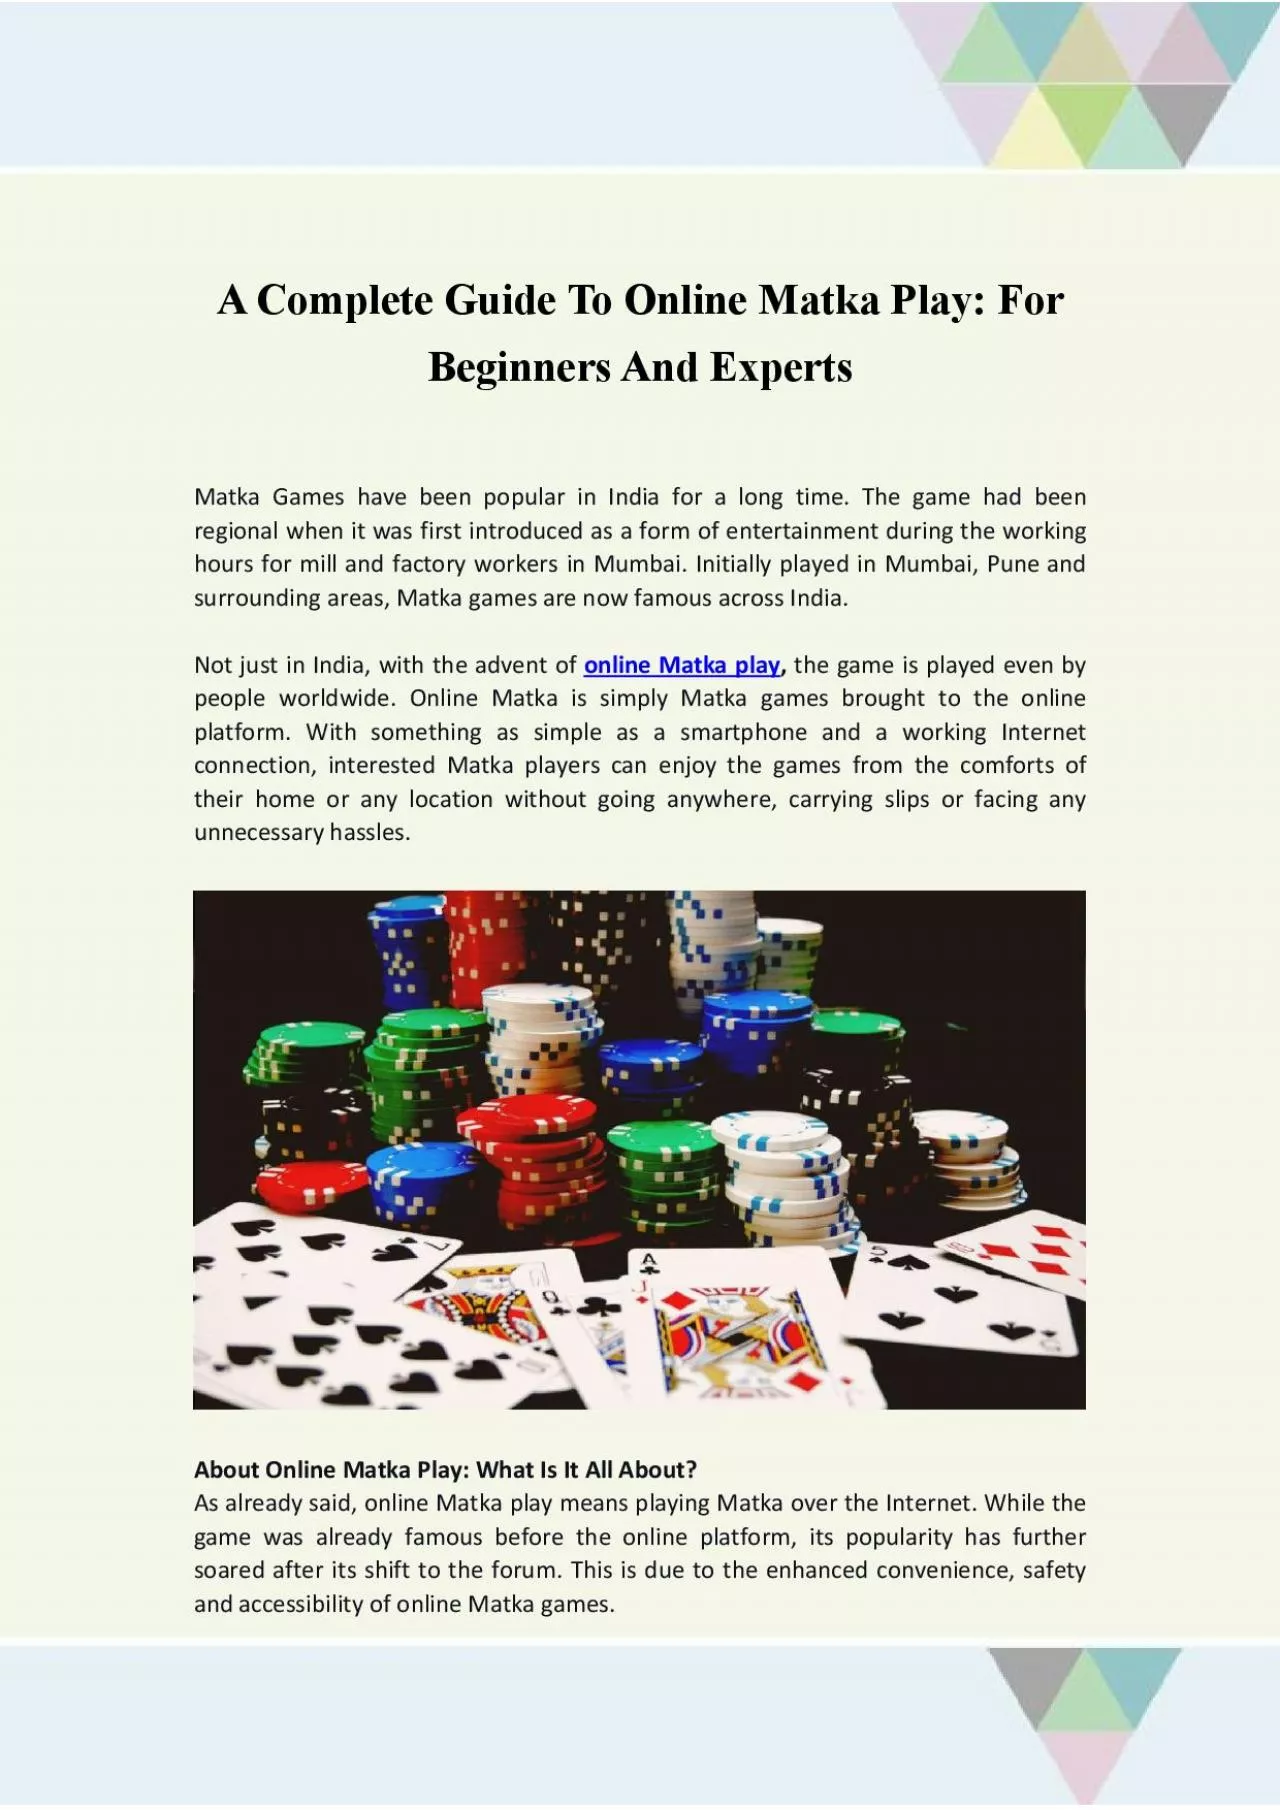 Best Online Matka Play - A Complete Guide To Online Matka Game